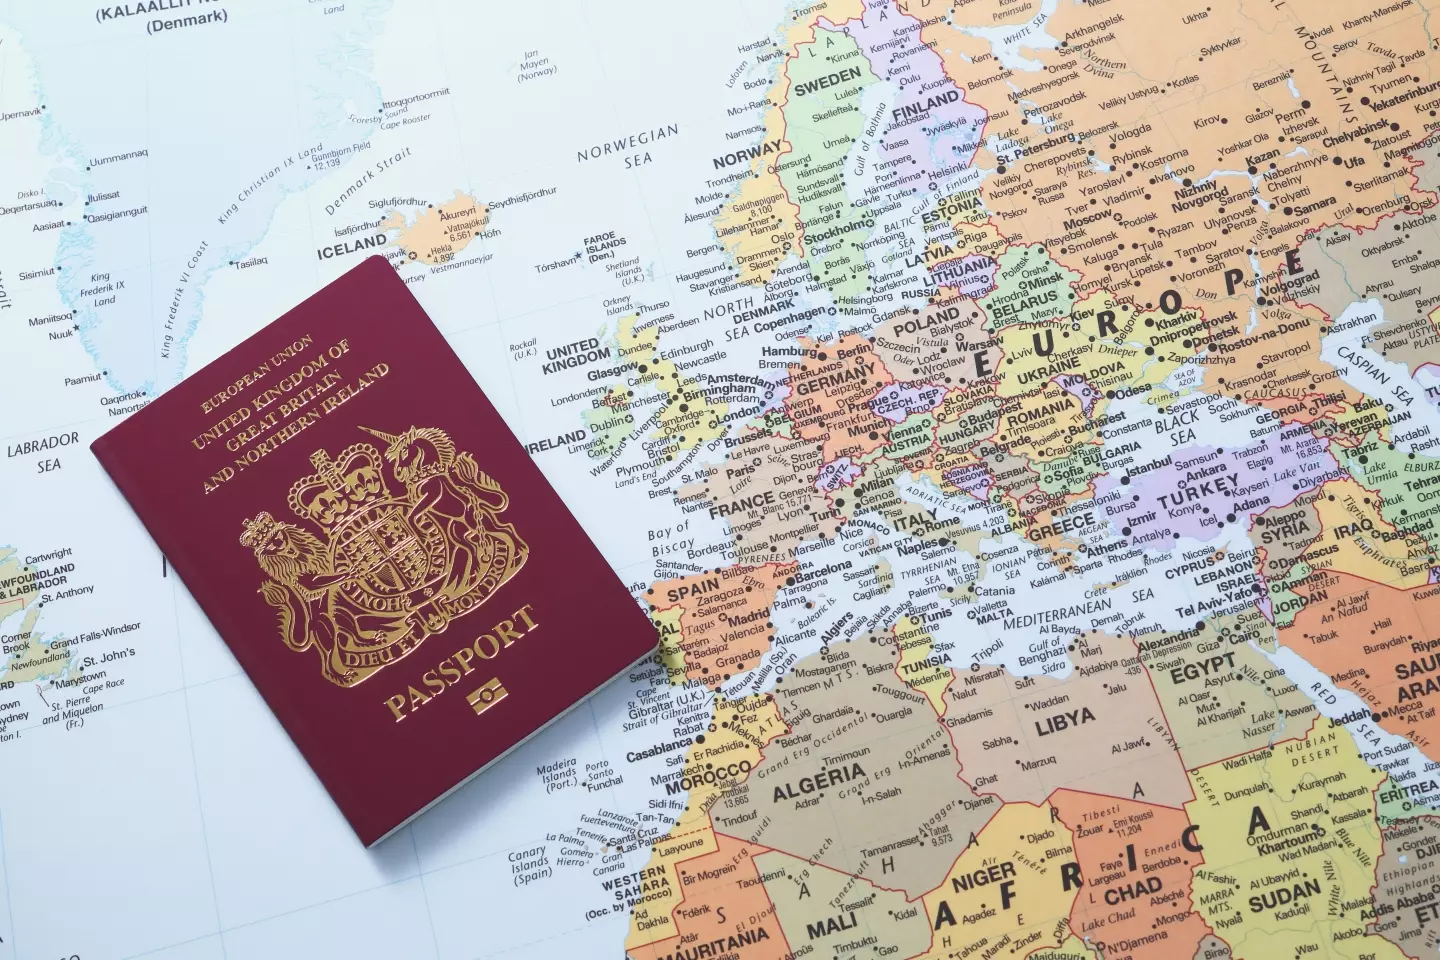 Check your passport before booking to avoid disappointment (